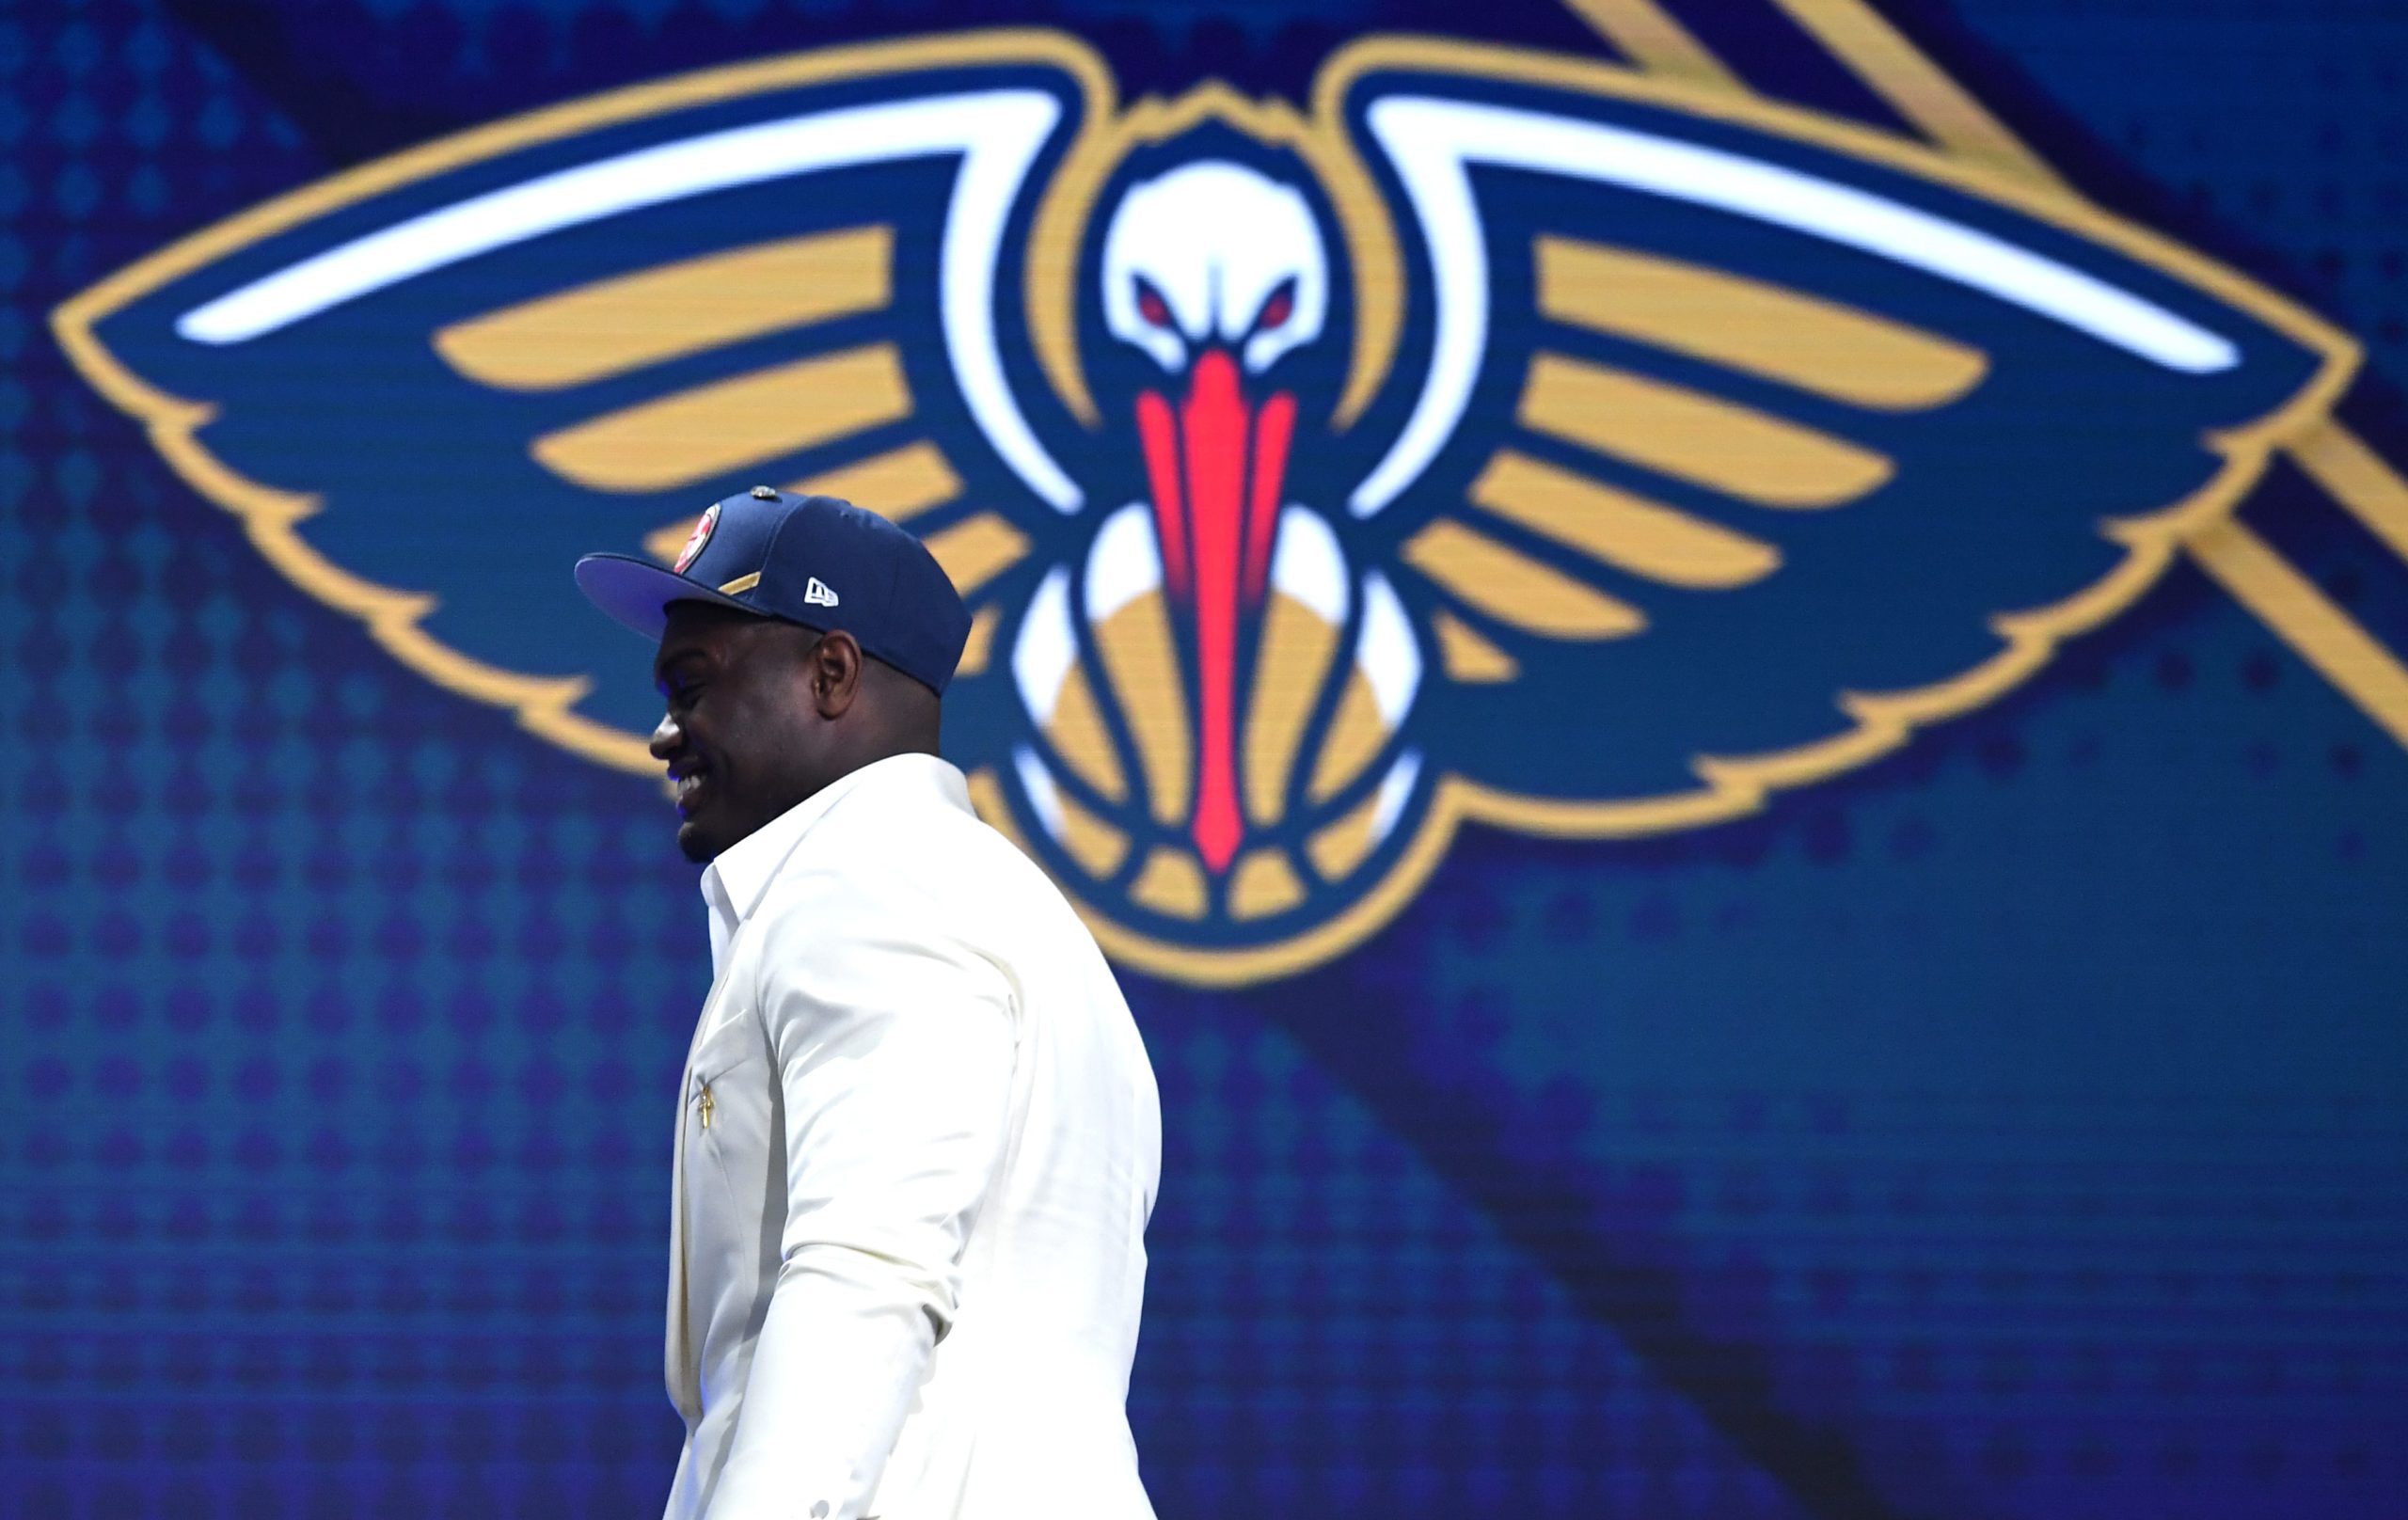 NEW YORK, NEW YORK - JUNE 20: Zion Williamson walks to the stage after being drafted with the first overall pick by the New Orleans Pelicans during the 2019 NBA Draft at the Barclays Center on June 20, 2019 in the Brooklyn borough of New York City. NOTE TO USER: User expressly acknowledges and agrees that, by downloading and or using this photograph, User is consenting to the terms and conditions of the Getty Images License Agreement. (Photo by Sarah Stier/Getty Images)